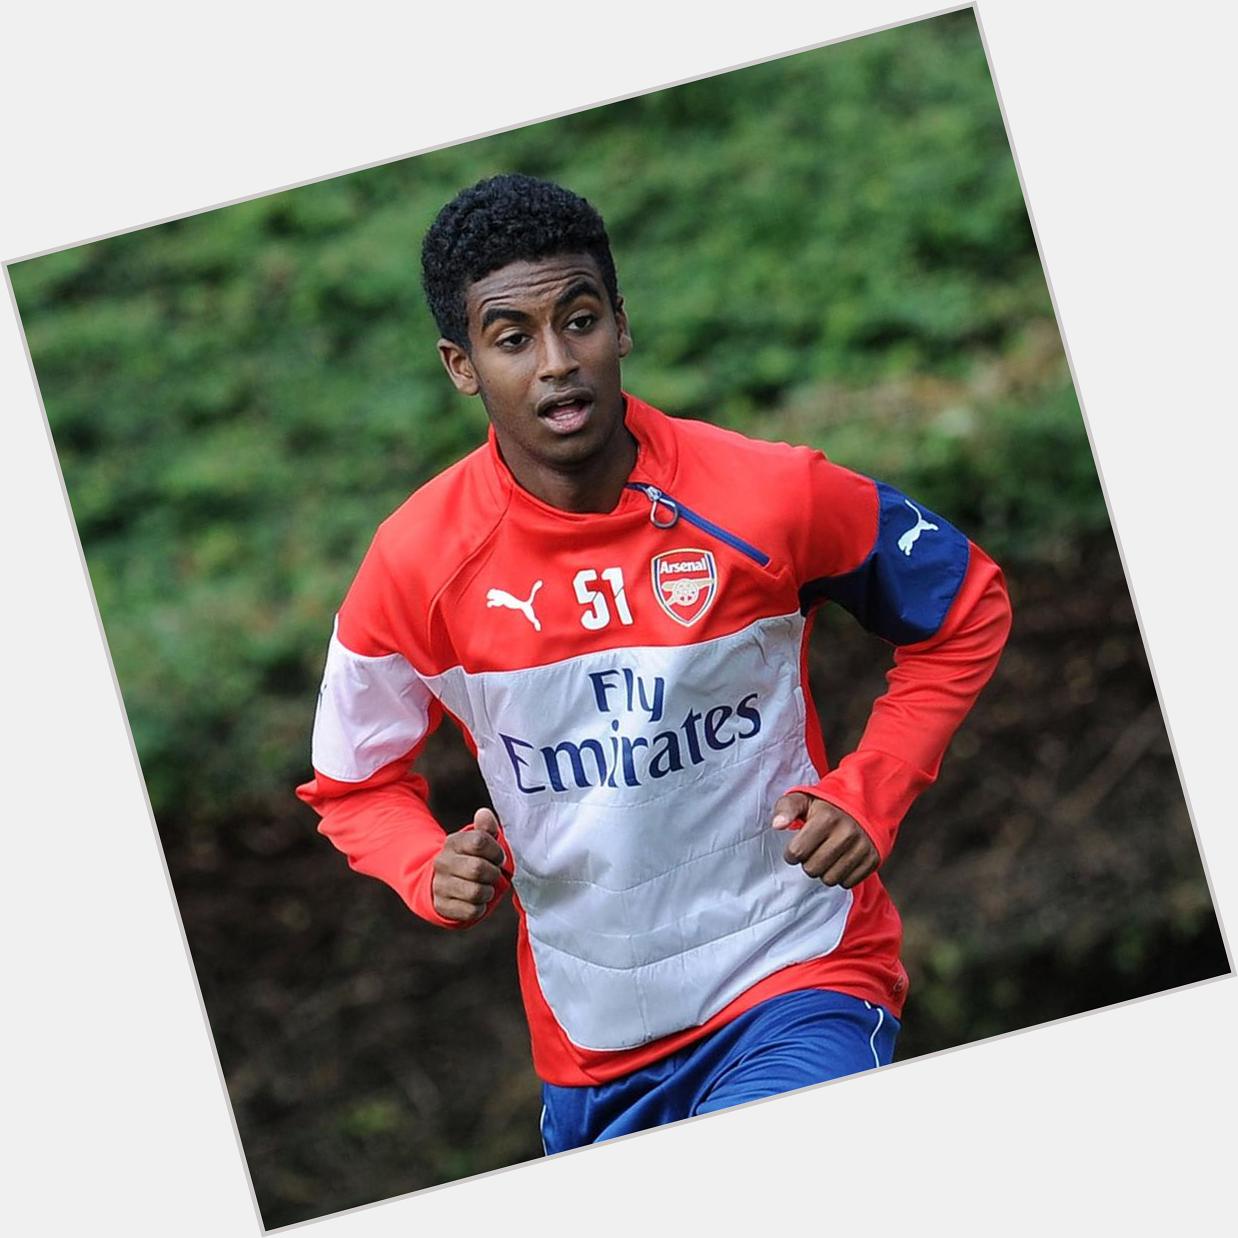 We also want to wish Gedion Zelalem a very happy 18th birthday! 